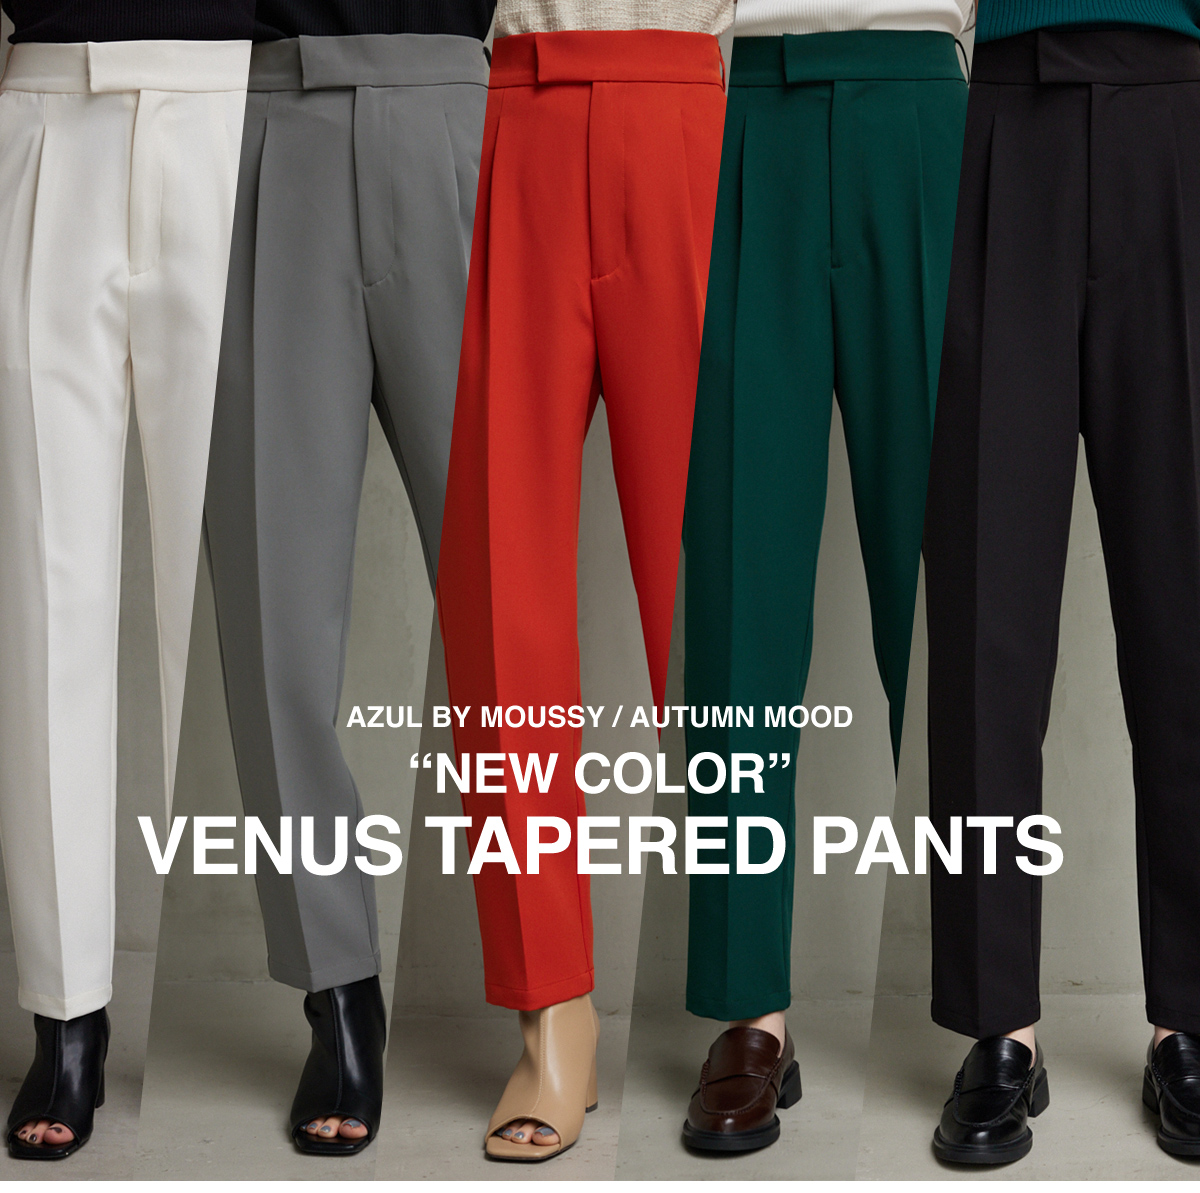 AZUL BY MOUSSY / AUTUMN MOOD [NEW COLOR] VENUS TAPERED PANTS